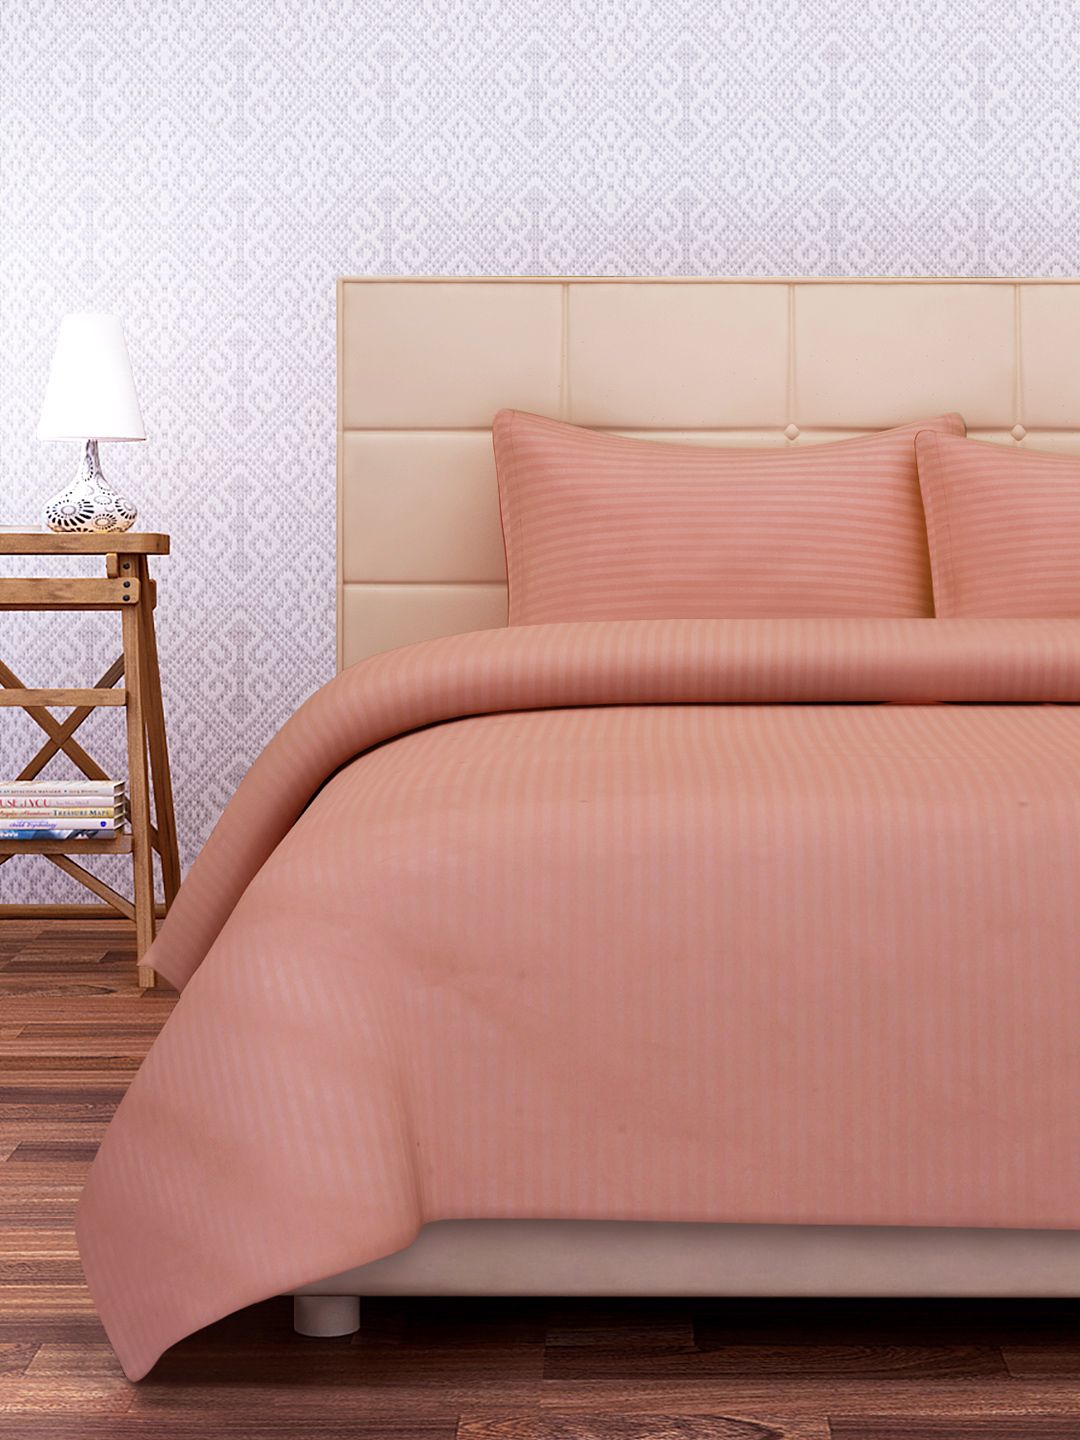 SEJ by Nisha Gupta Peach-Coloured 220 TC Fine Cotton Queen Bedsheet with 2 Pillow Covers Price in India